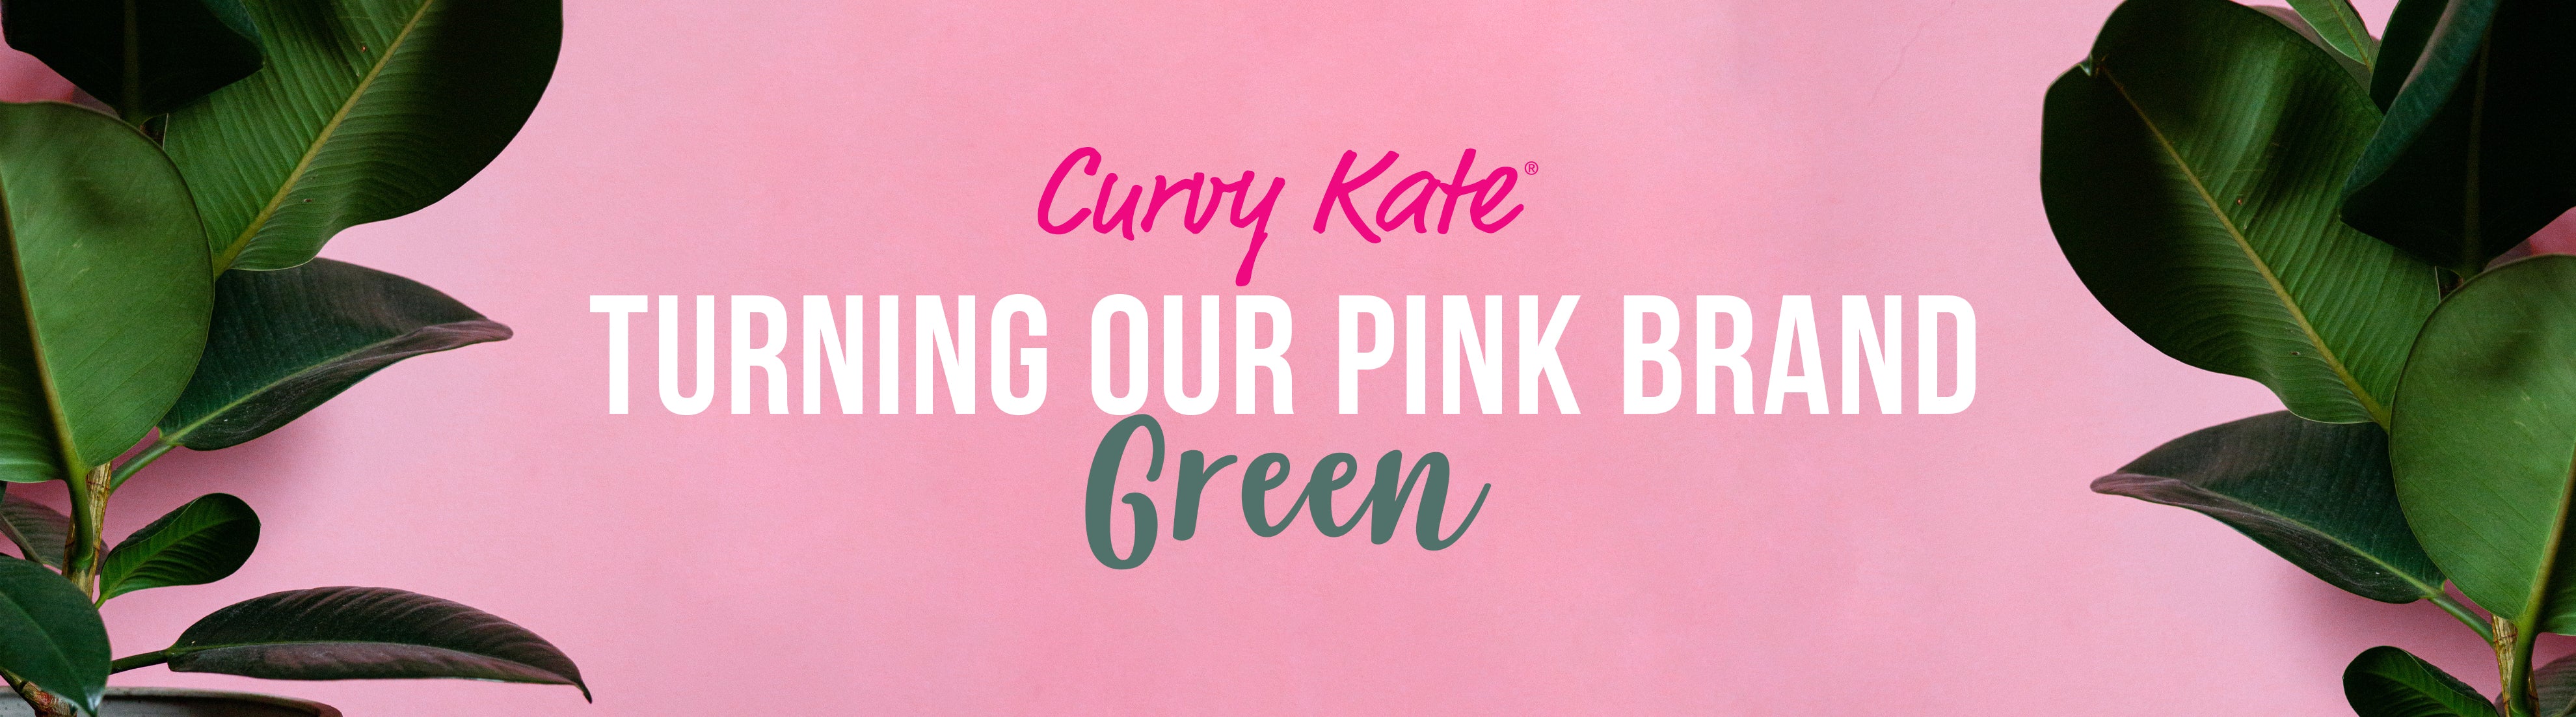 Turning Our Pink Brand Green